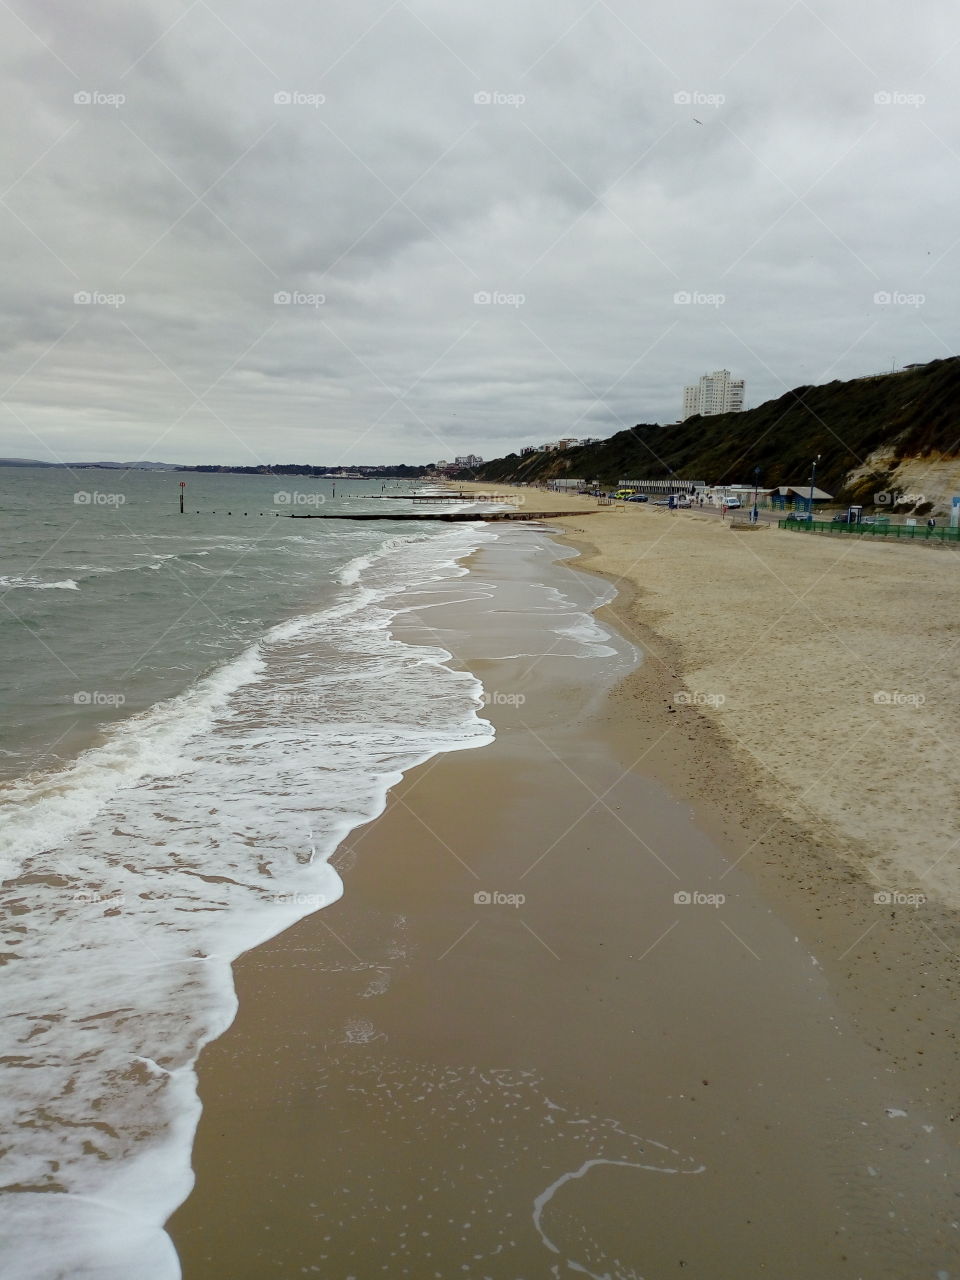 Bournemouth beach in the winter